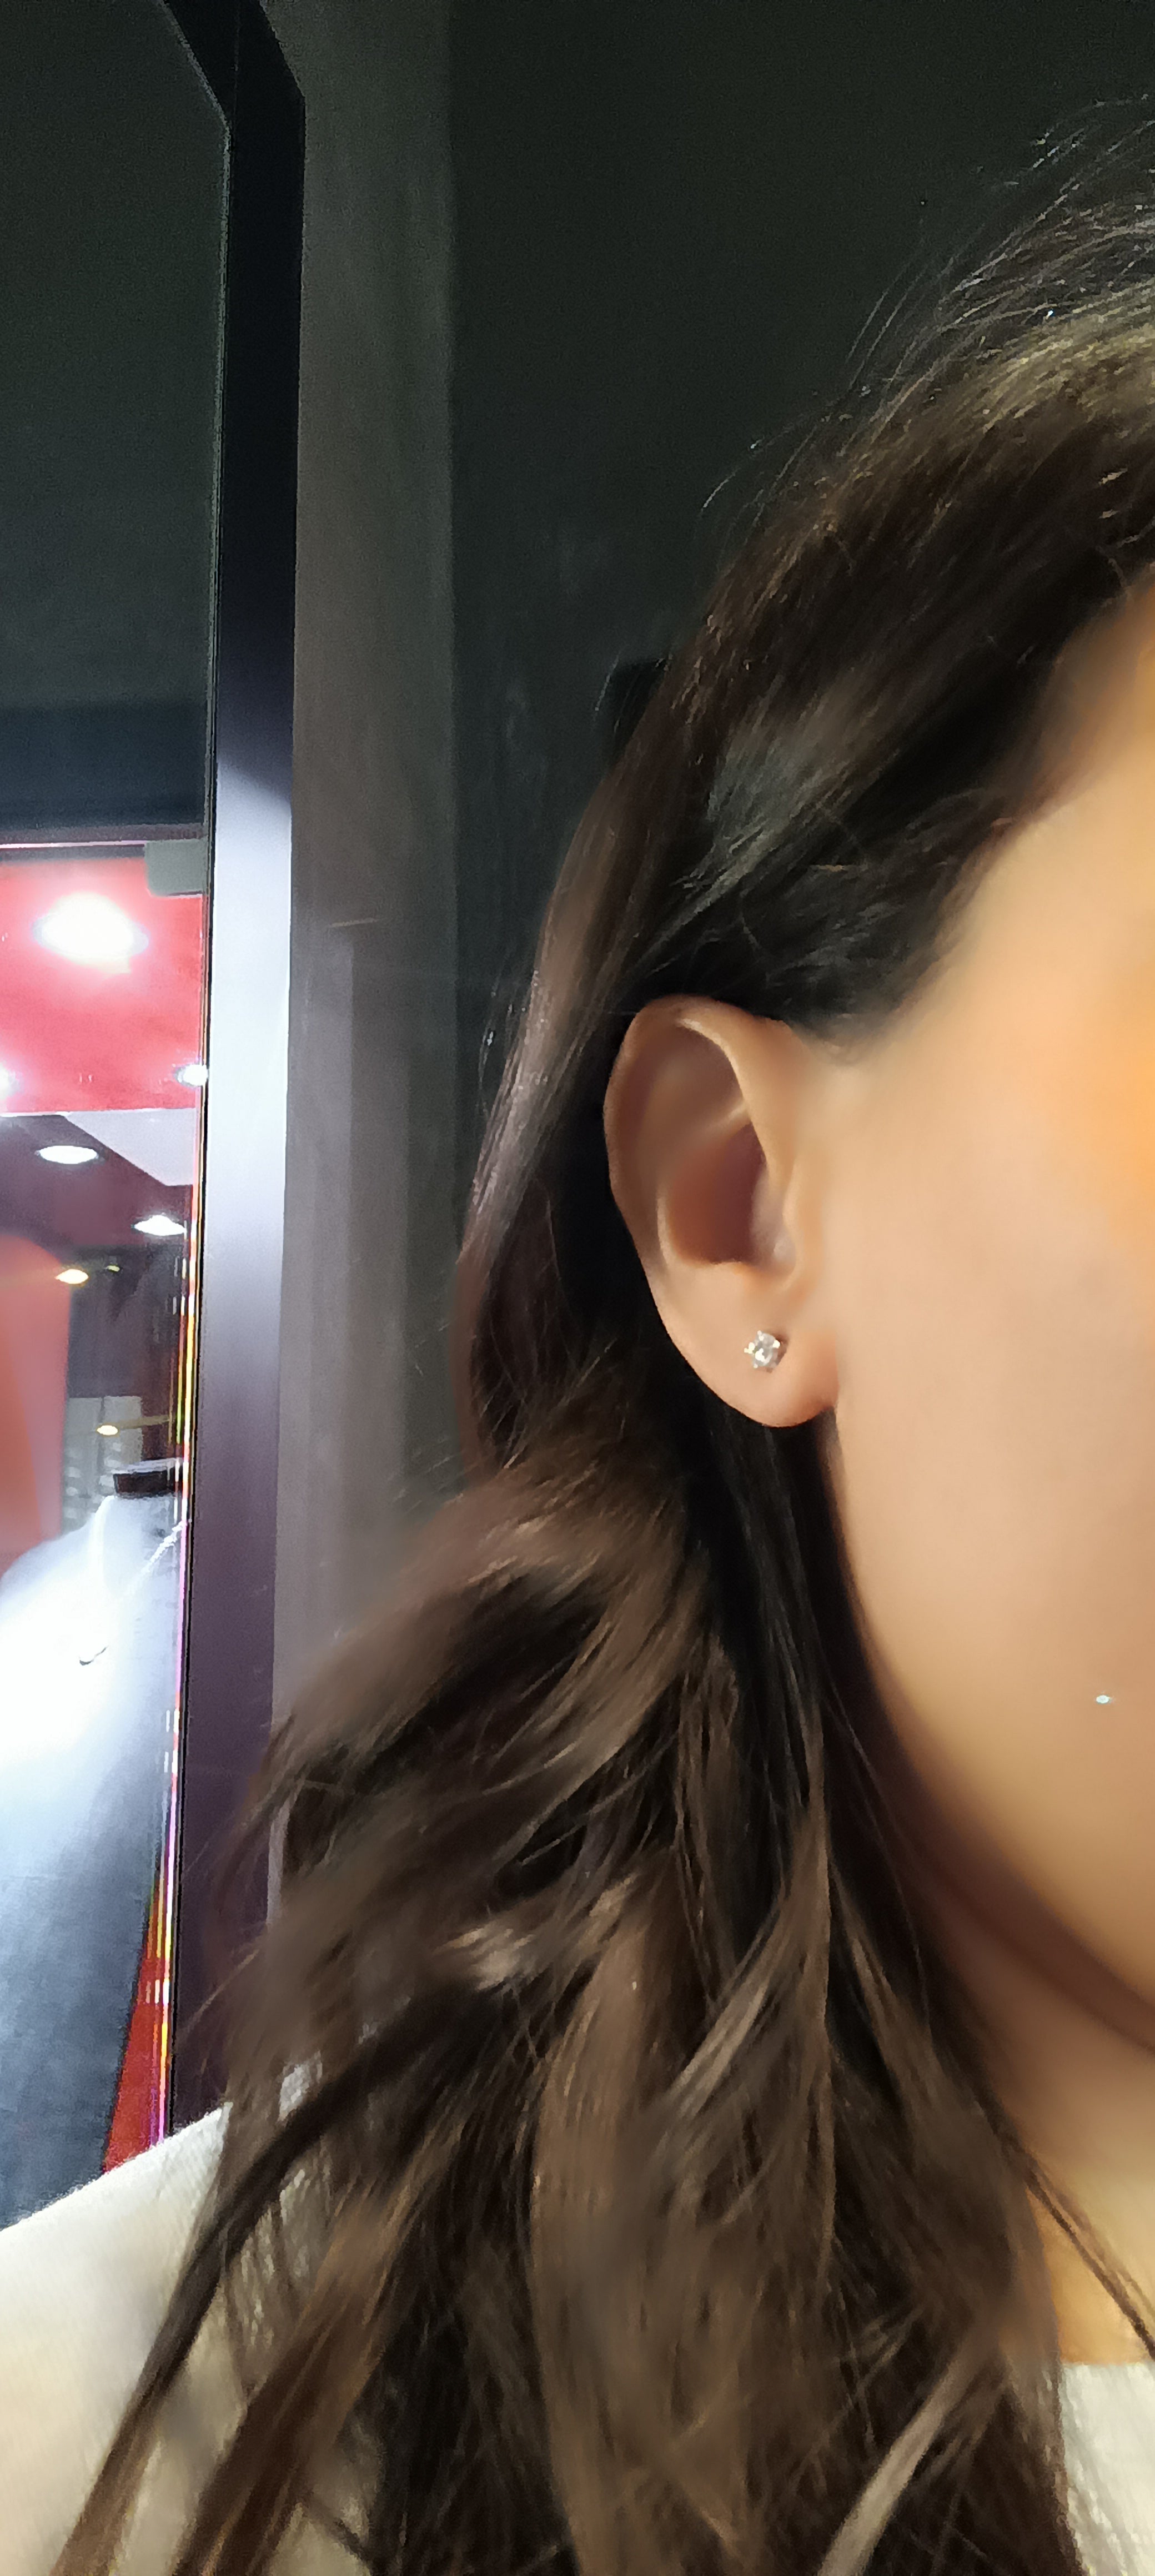 This timeless classic  is all about the round brilliant cut stone, a magnificent 0.60 carat VS G color stone, mounted on a refined 18 carat white gold earring.s grams 1.87
any item of our jewelry collection has a dedicated identification number